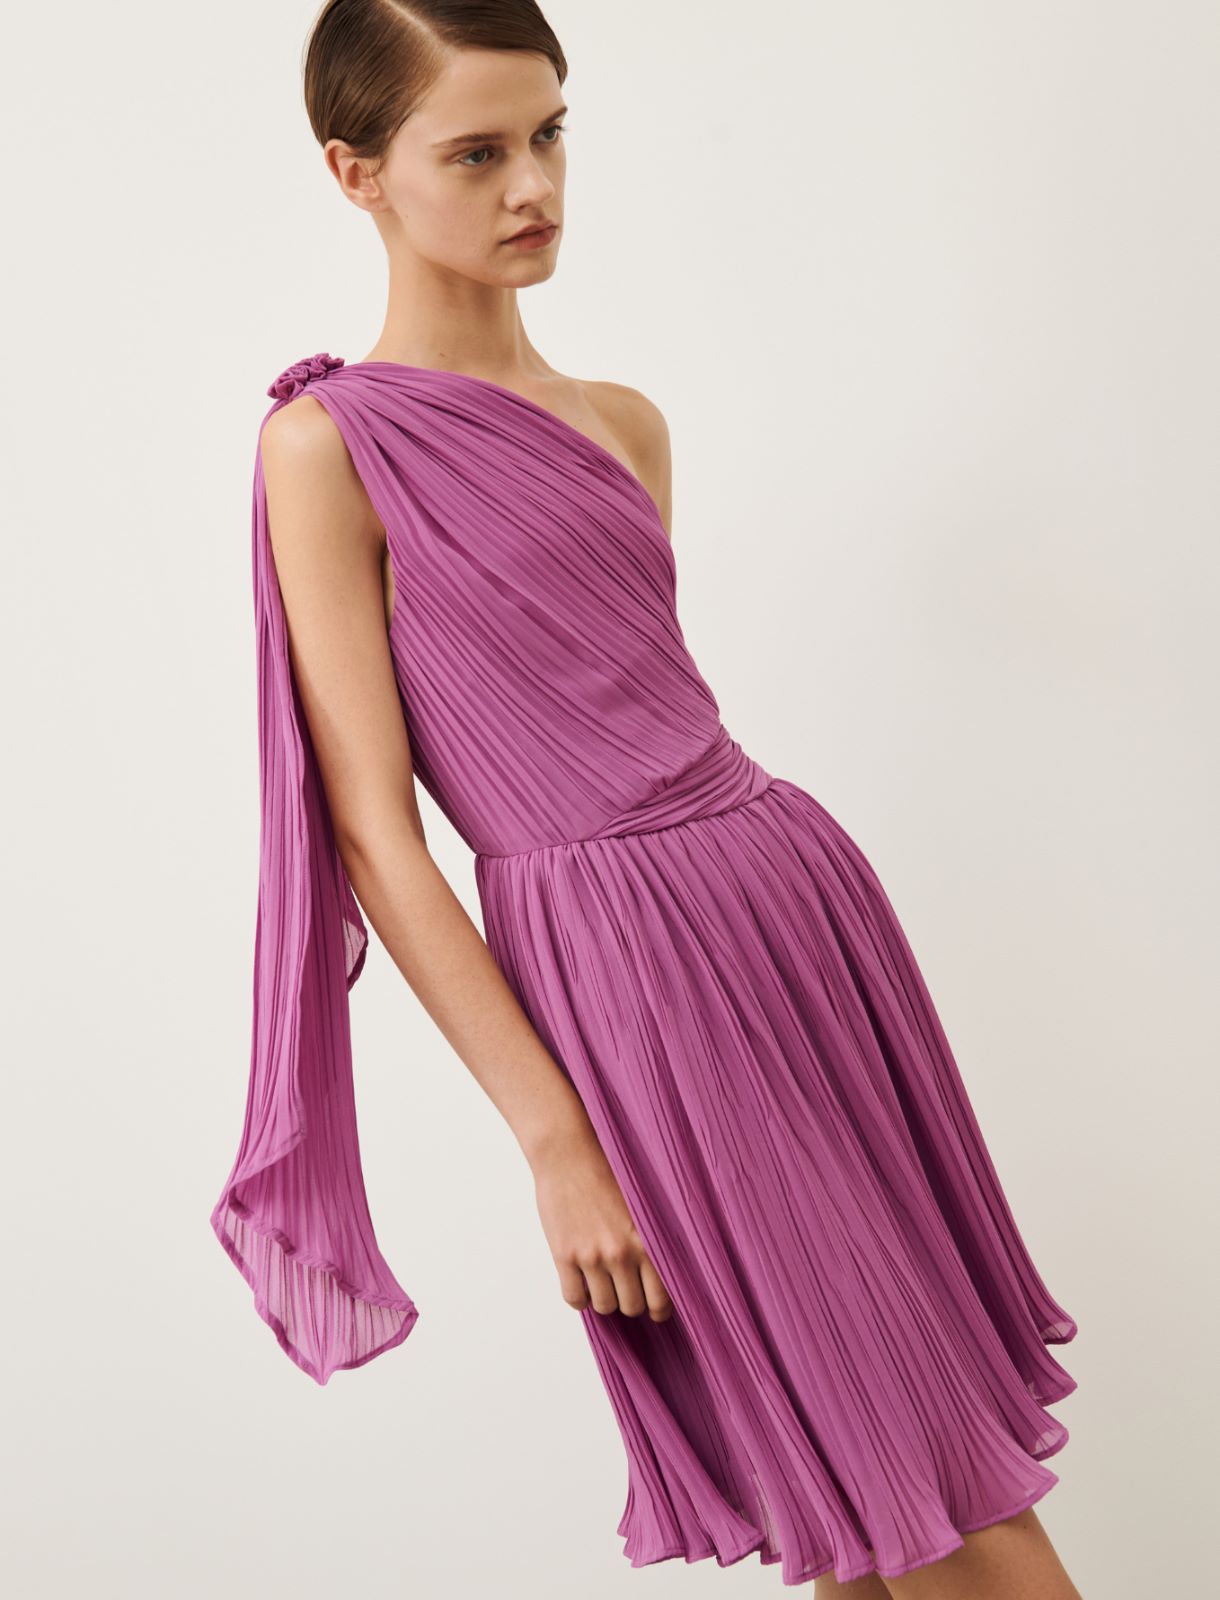 Pleated dress, orchis rose | Marella